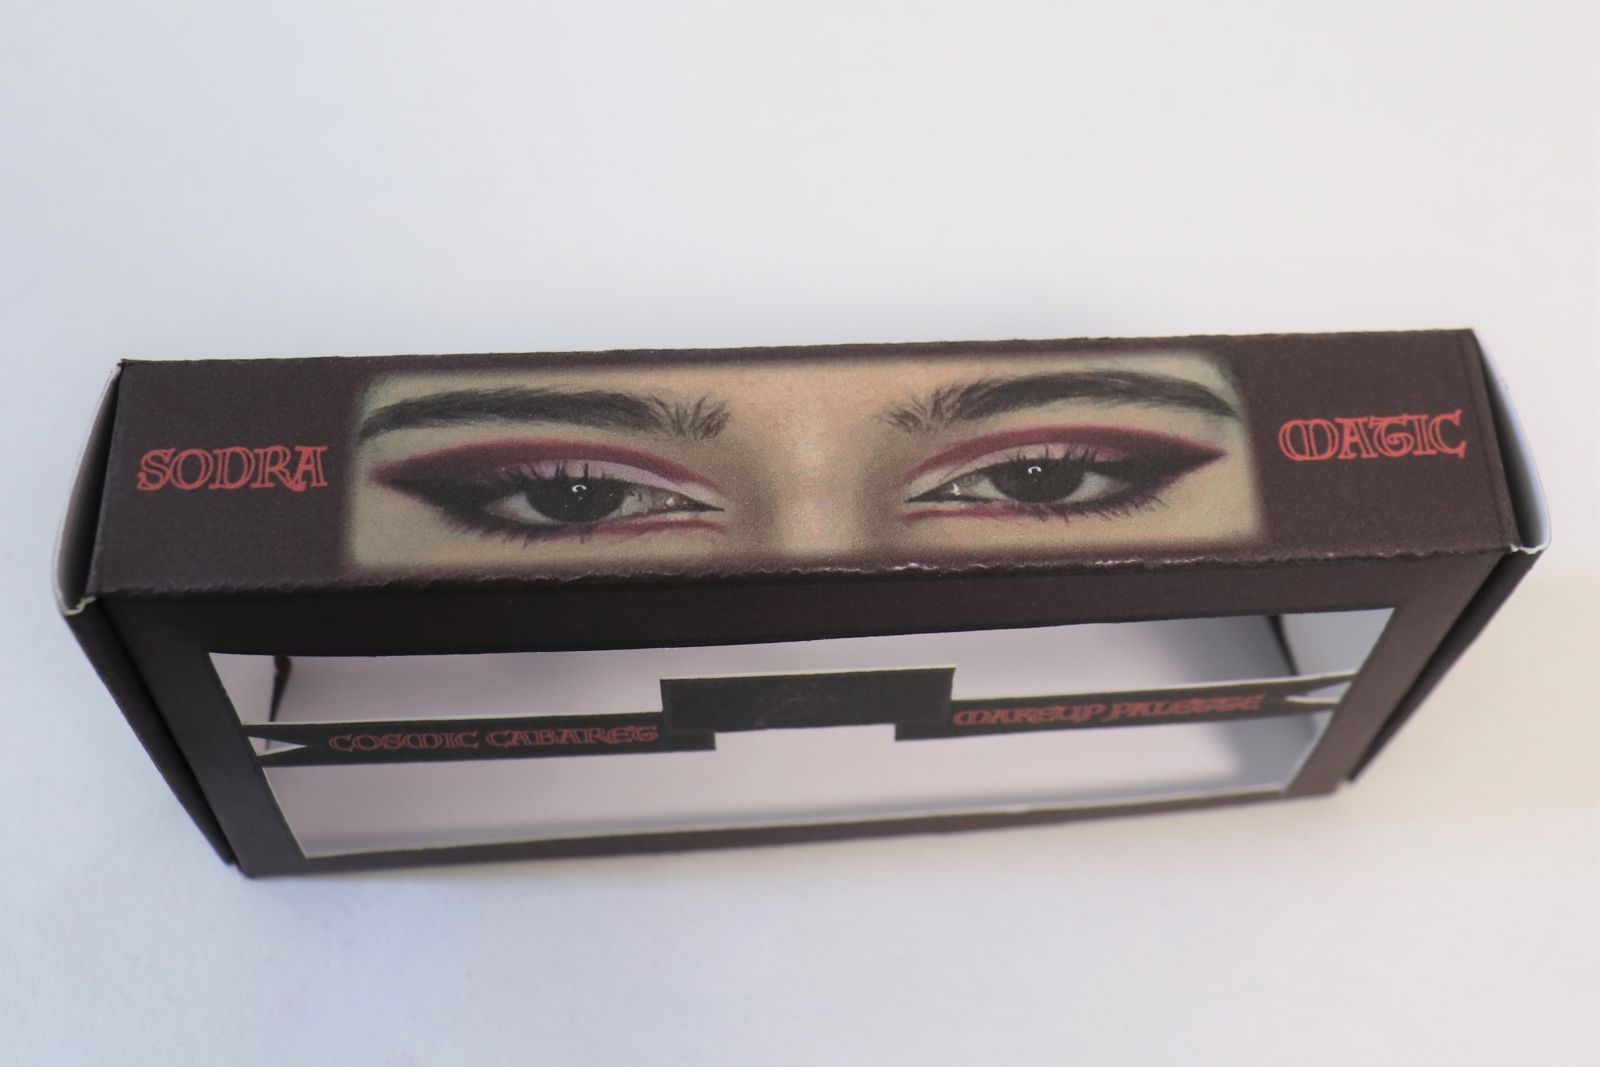 product packaging with graphic of eyes